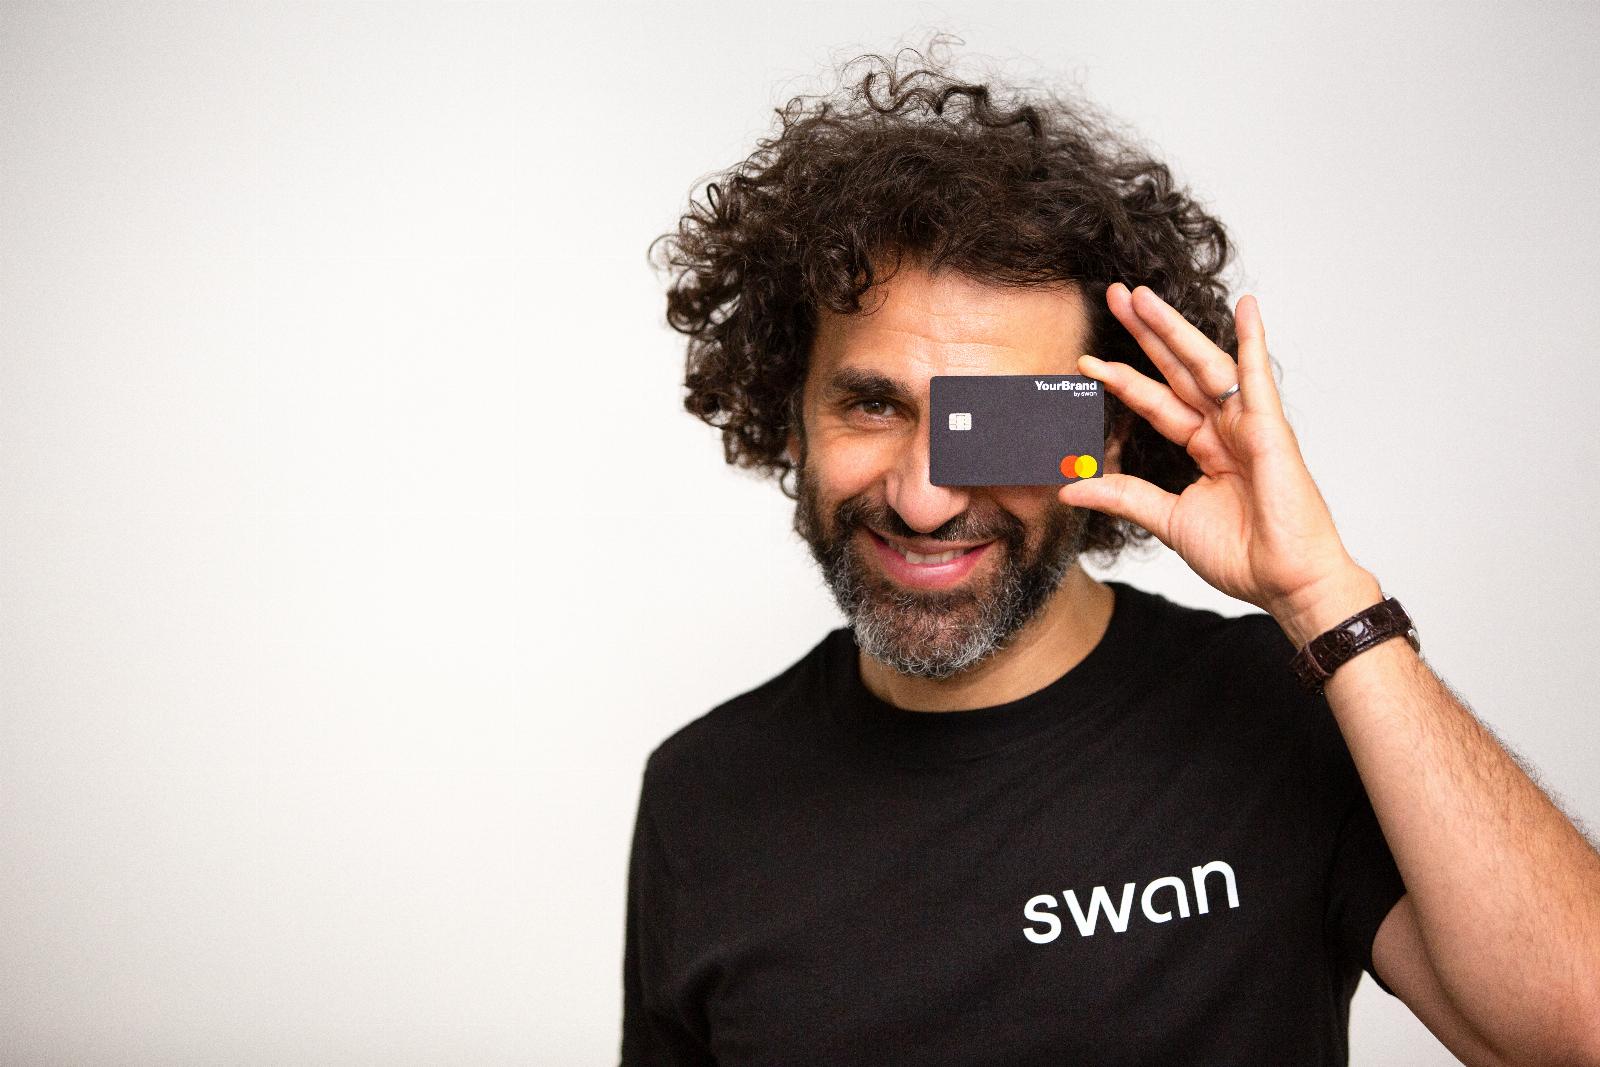 Swan secures $40 million to bring embedded banking to Europe